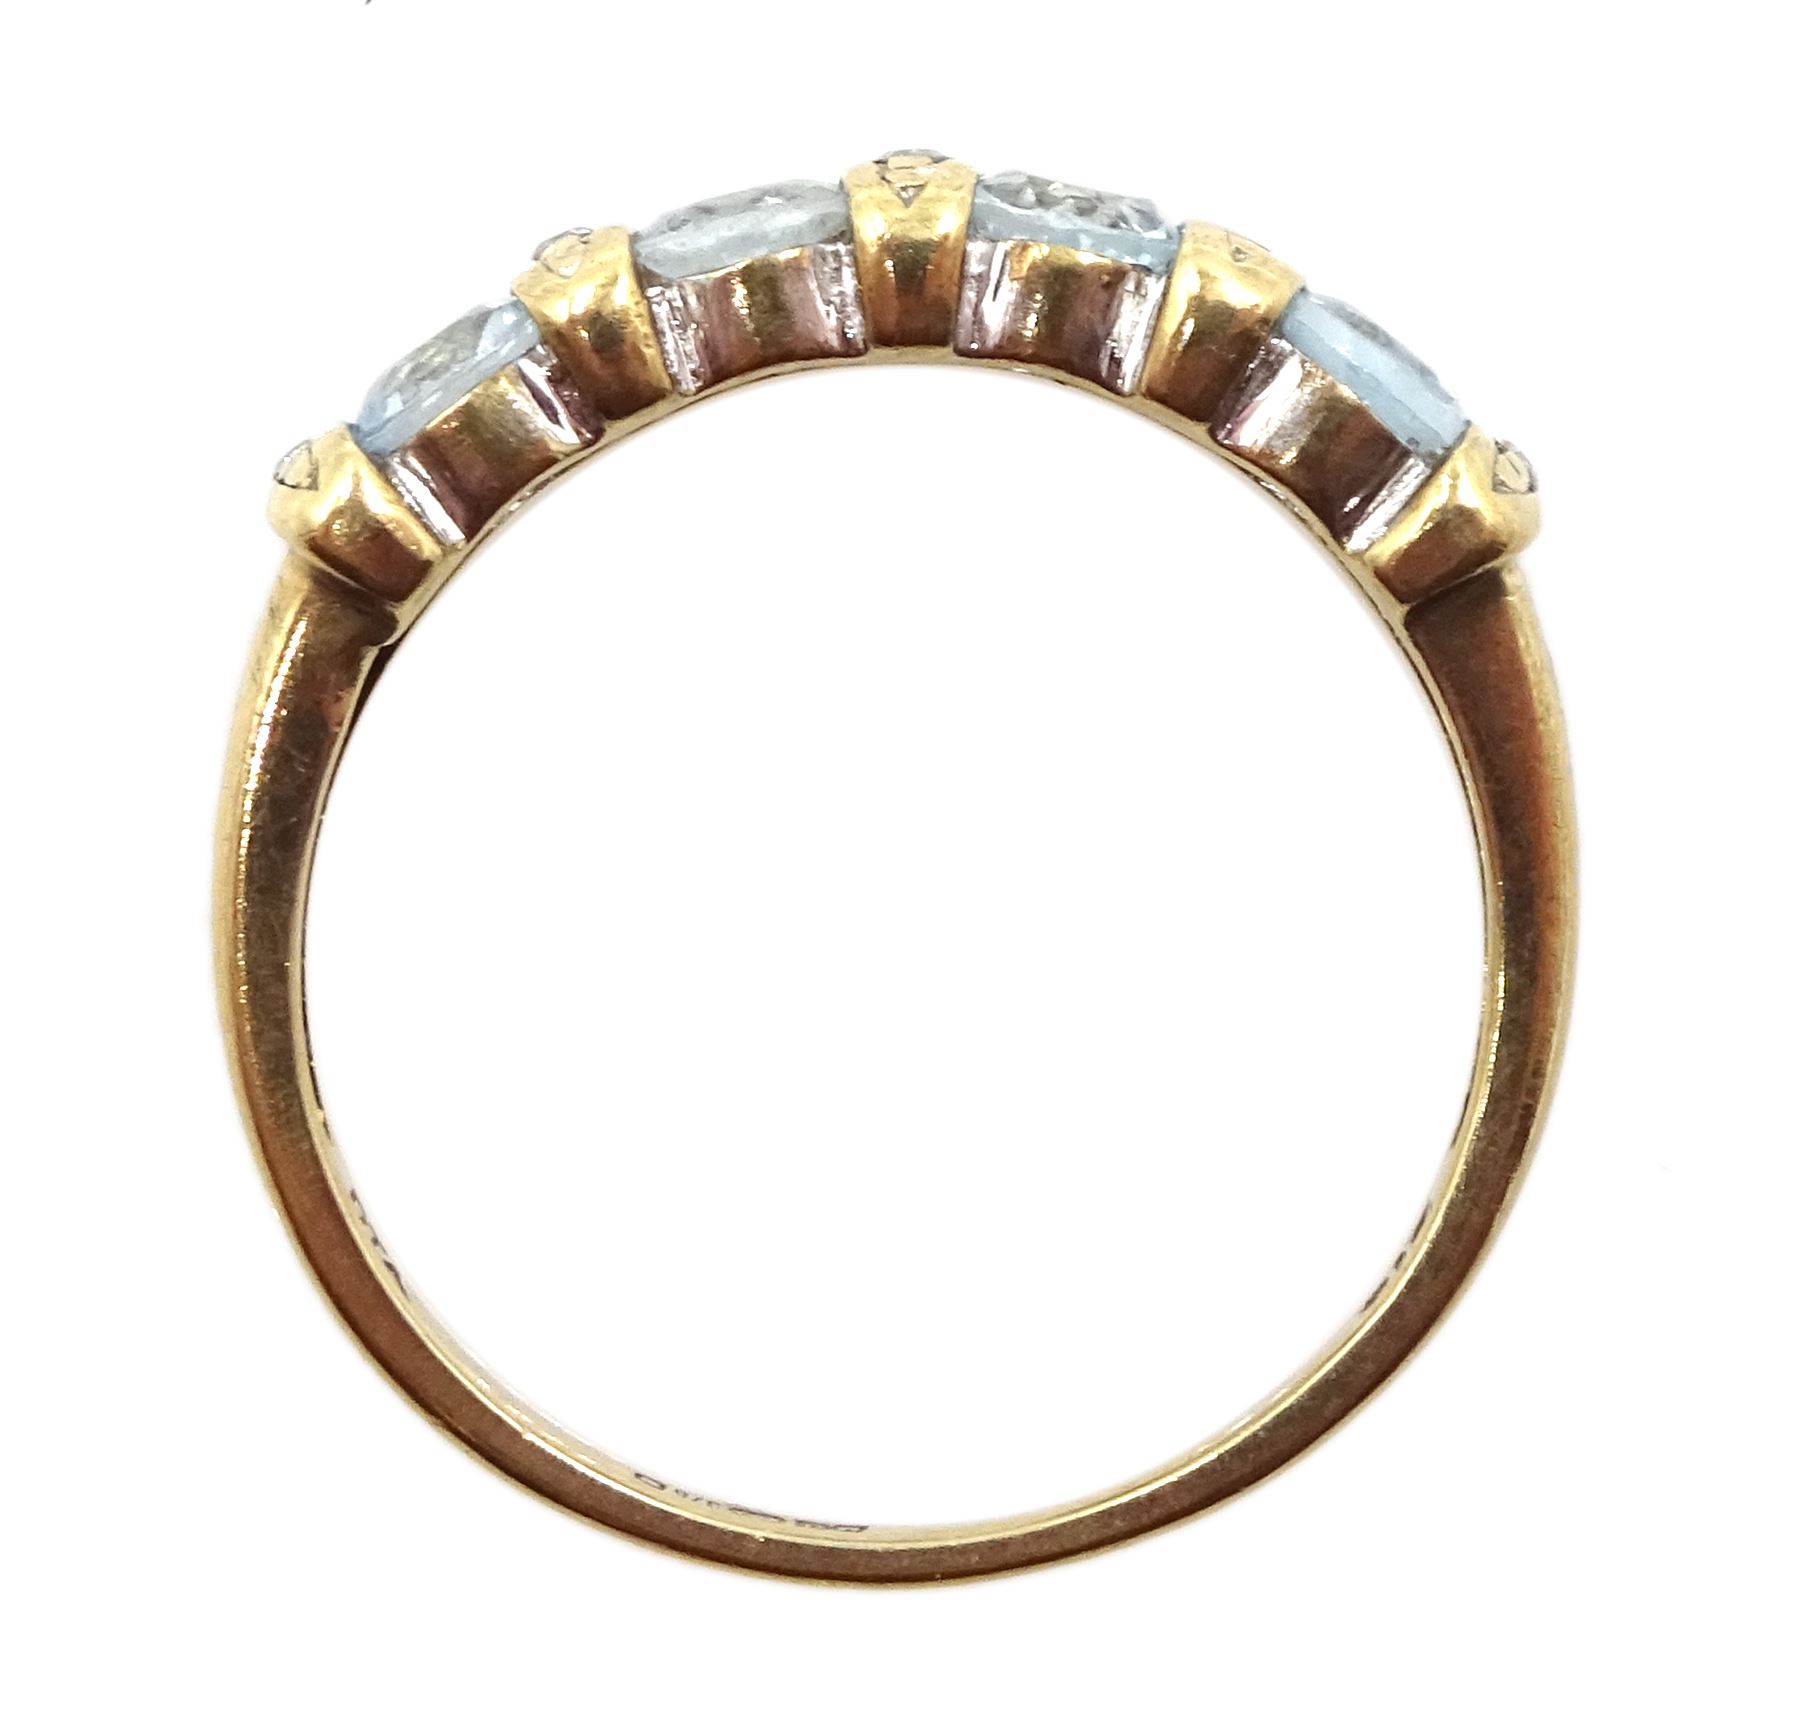 9ct gold four stone topaz ring - Image 4 of 4